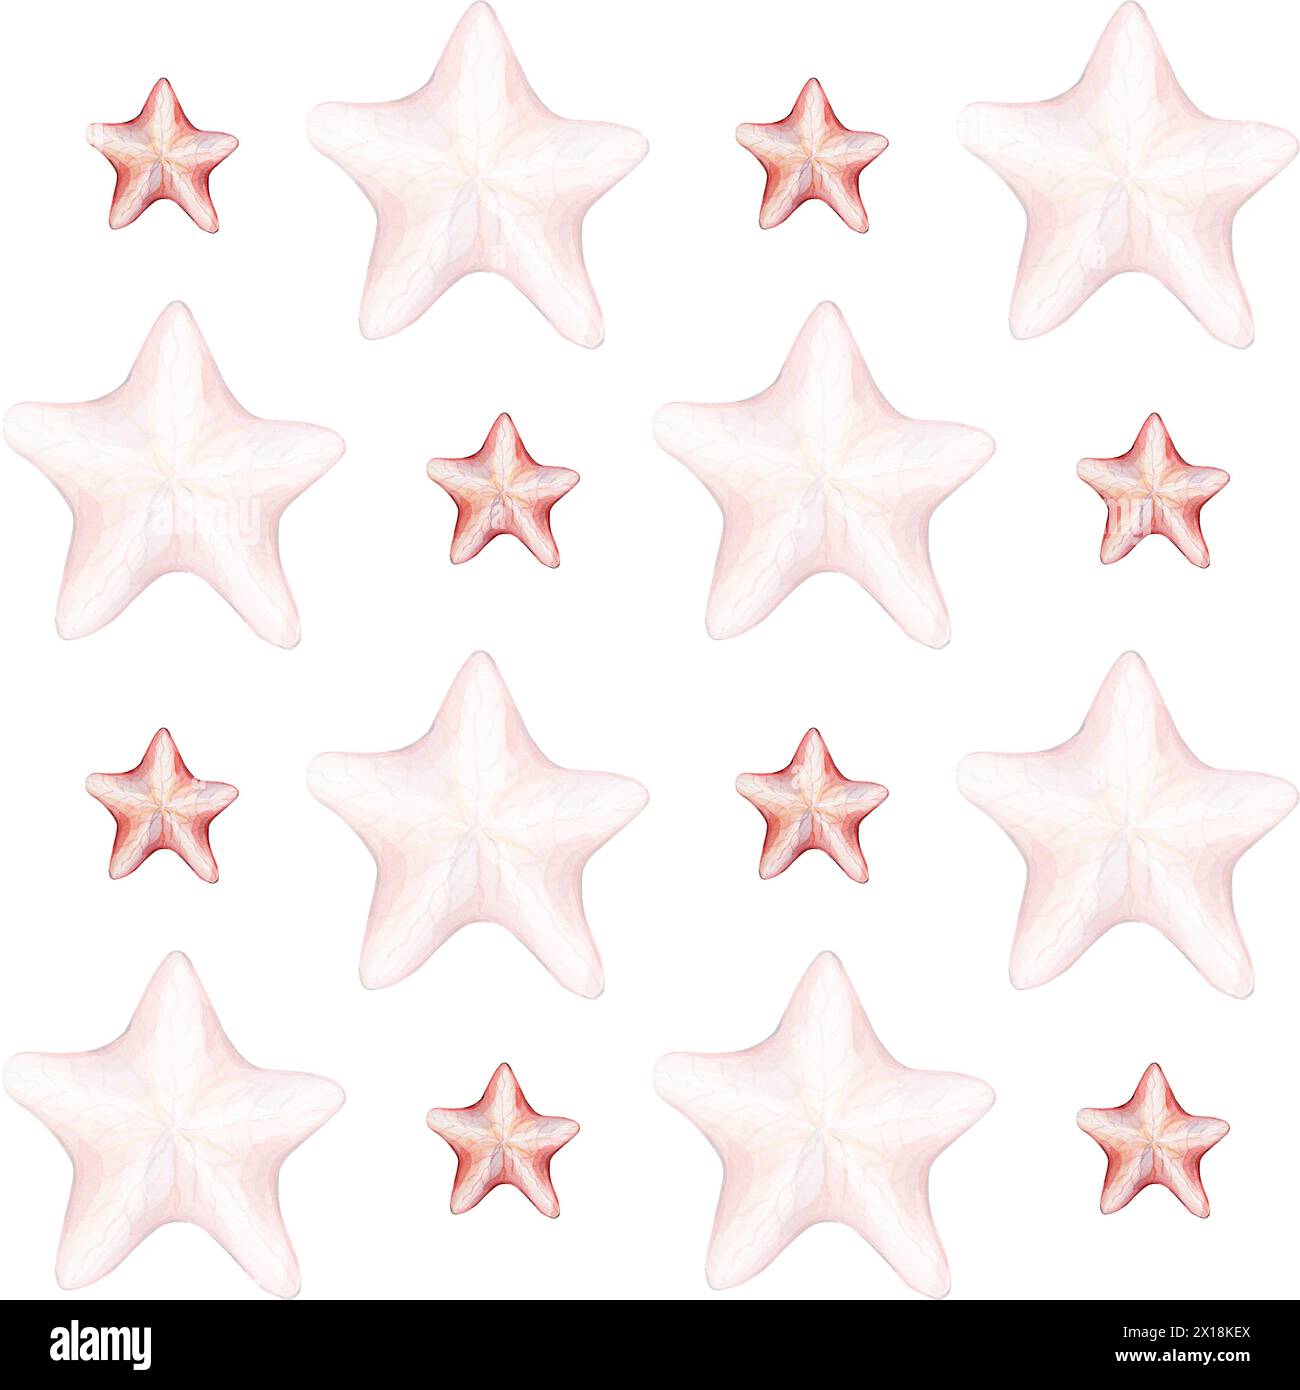 Seamless pattern with watercolor starfish Stock Photo